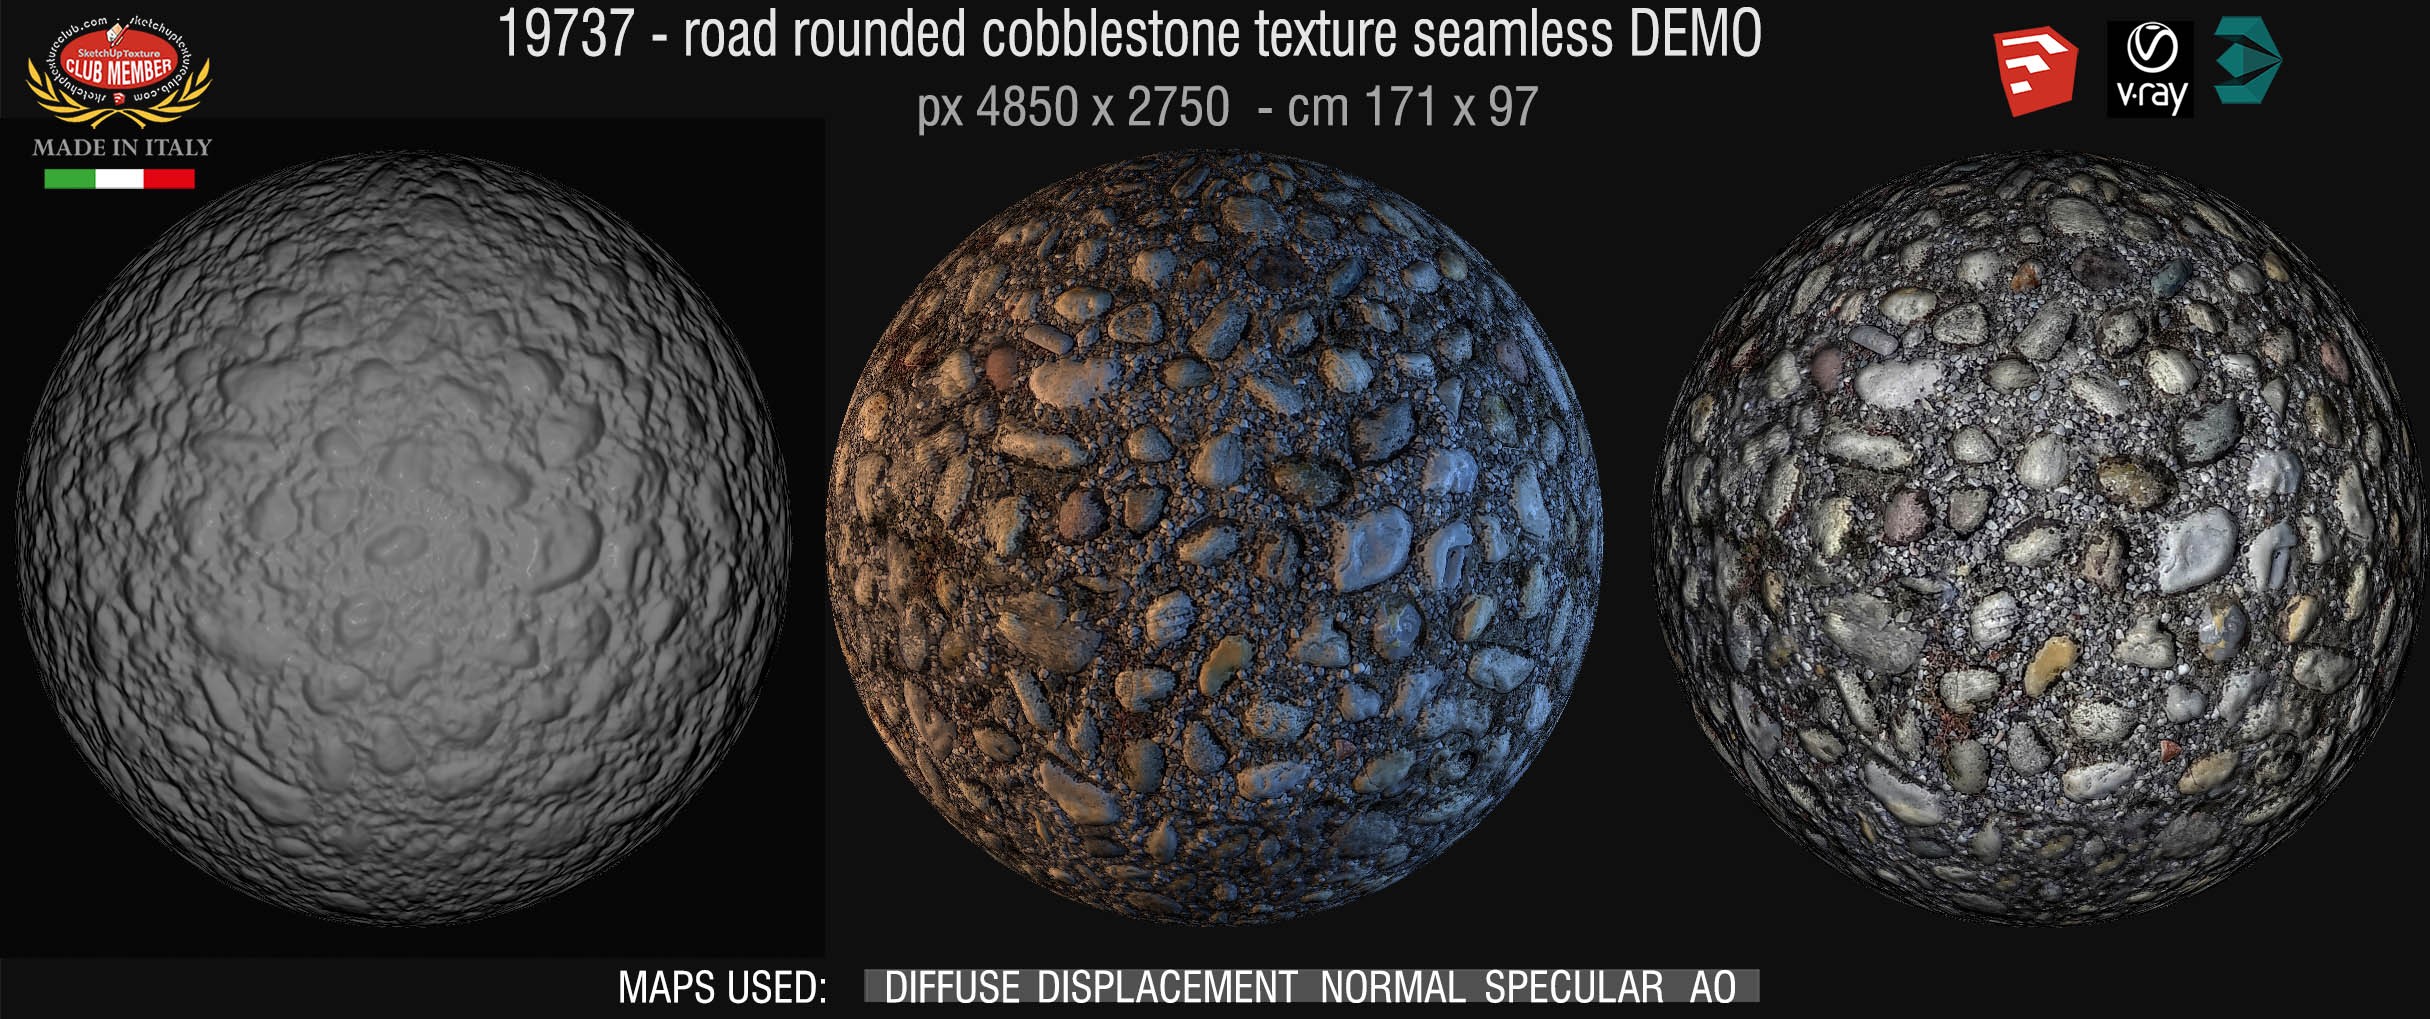 19737 Road rounded cobblestone texture seamless +maps DEMO